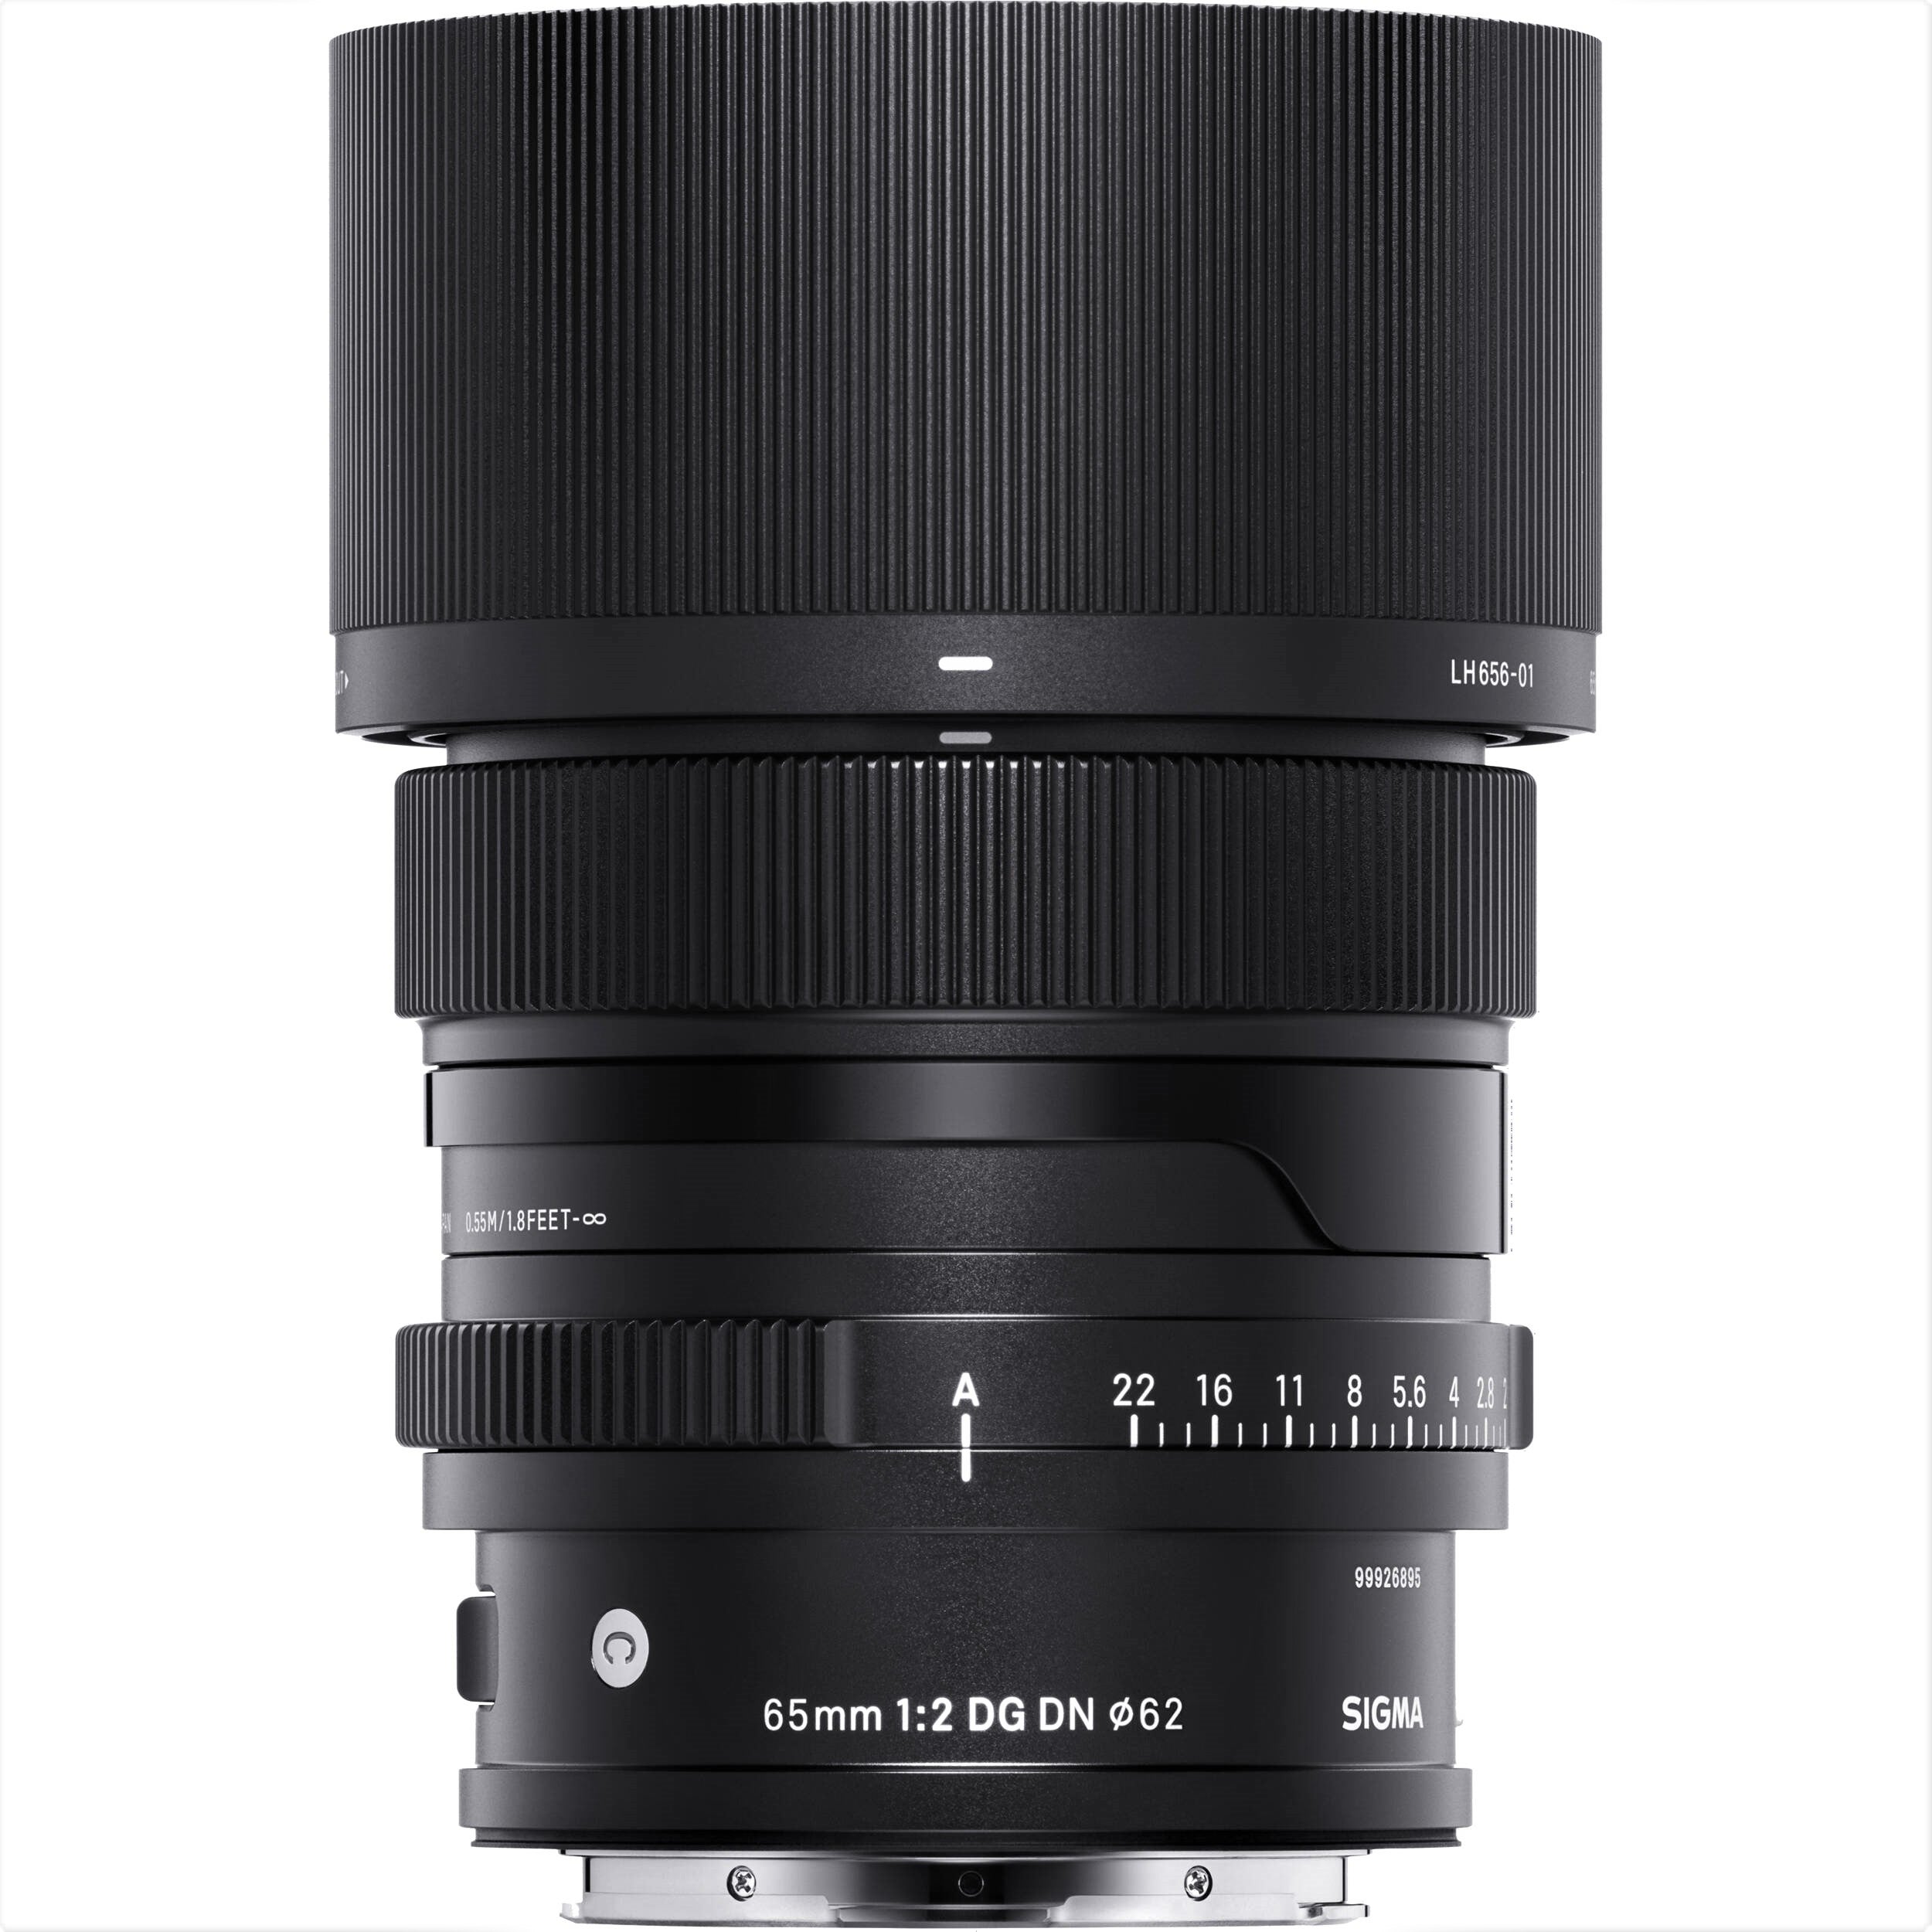 Sigma 65mm F2.0 DG DN Contemporary Lens for Sony E with Attached Lens Hood on the Top